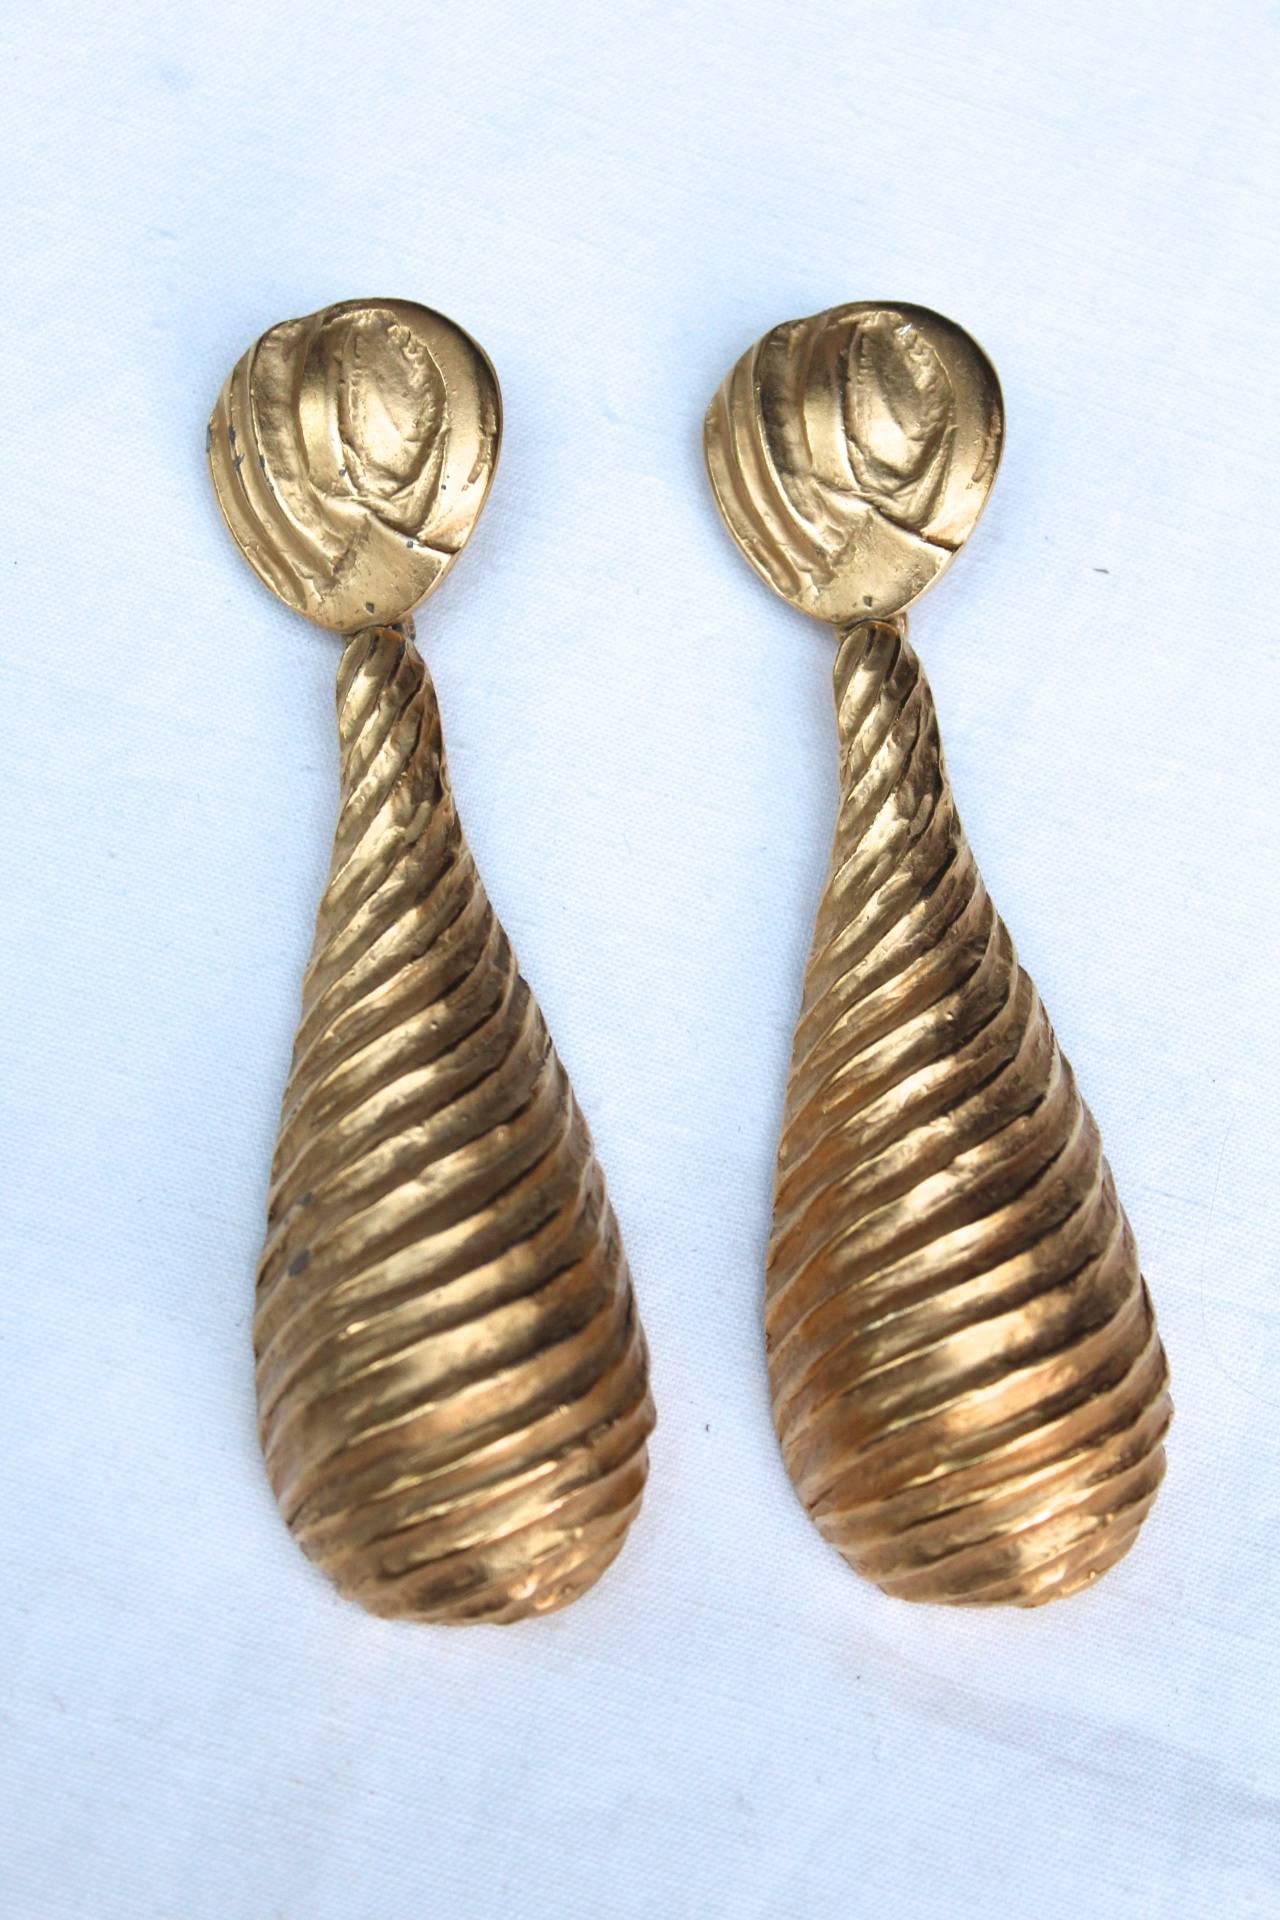 YVES SAINT LAURENT (Rive Gauche Made in France) Important pair of pendant clip on earrings clips with chiseled gilt metal from the 1980s. 

These earrings are photographed in the book on Loulou de la Falaise, which designed them for Yves Saint